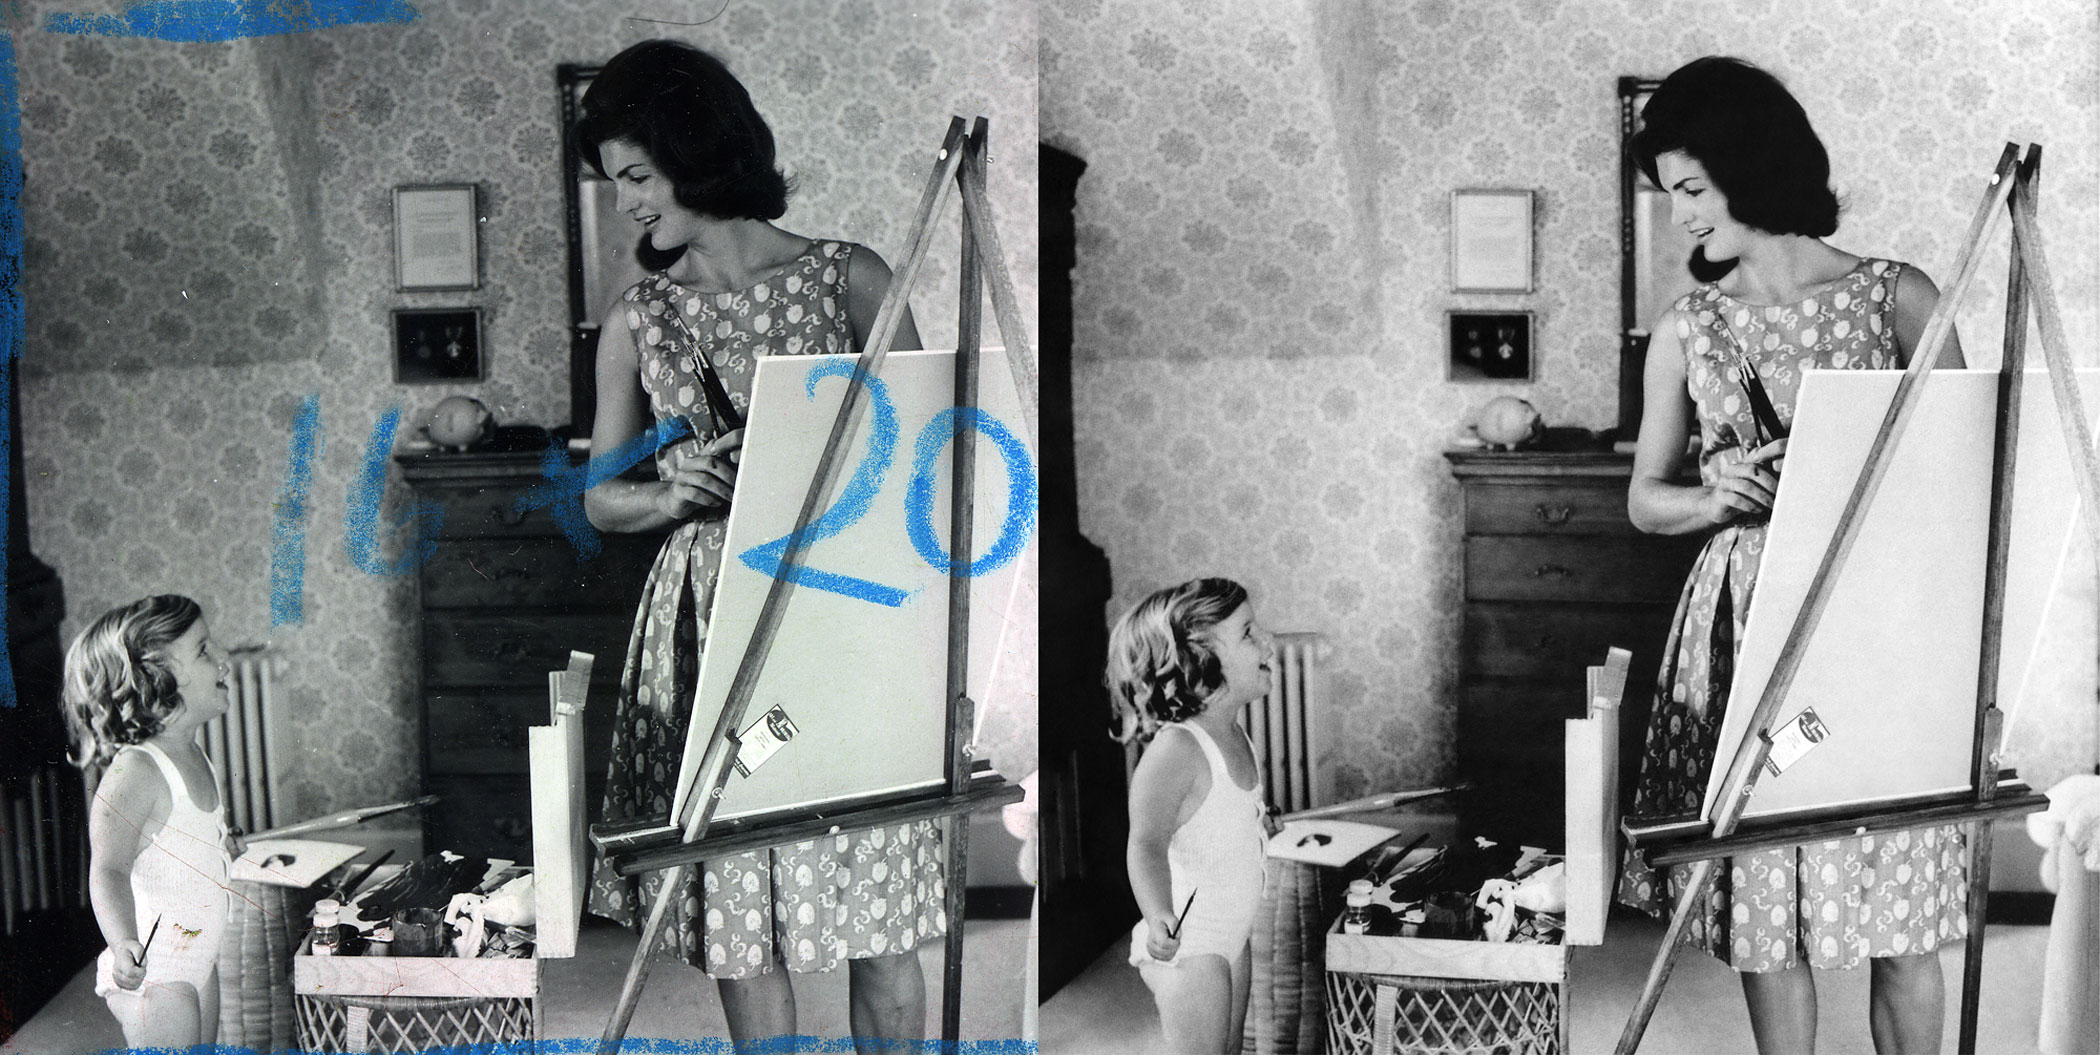 Jacqueline Kennedy paints with her daughter, Caroline. The blue marks made by the photographer were removed for the image at right, which appears in the Newseum’s “Creating Camelot” exhibit.